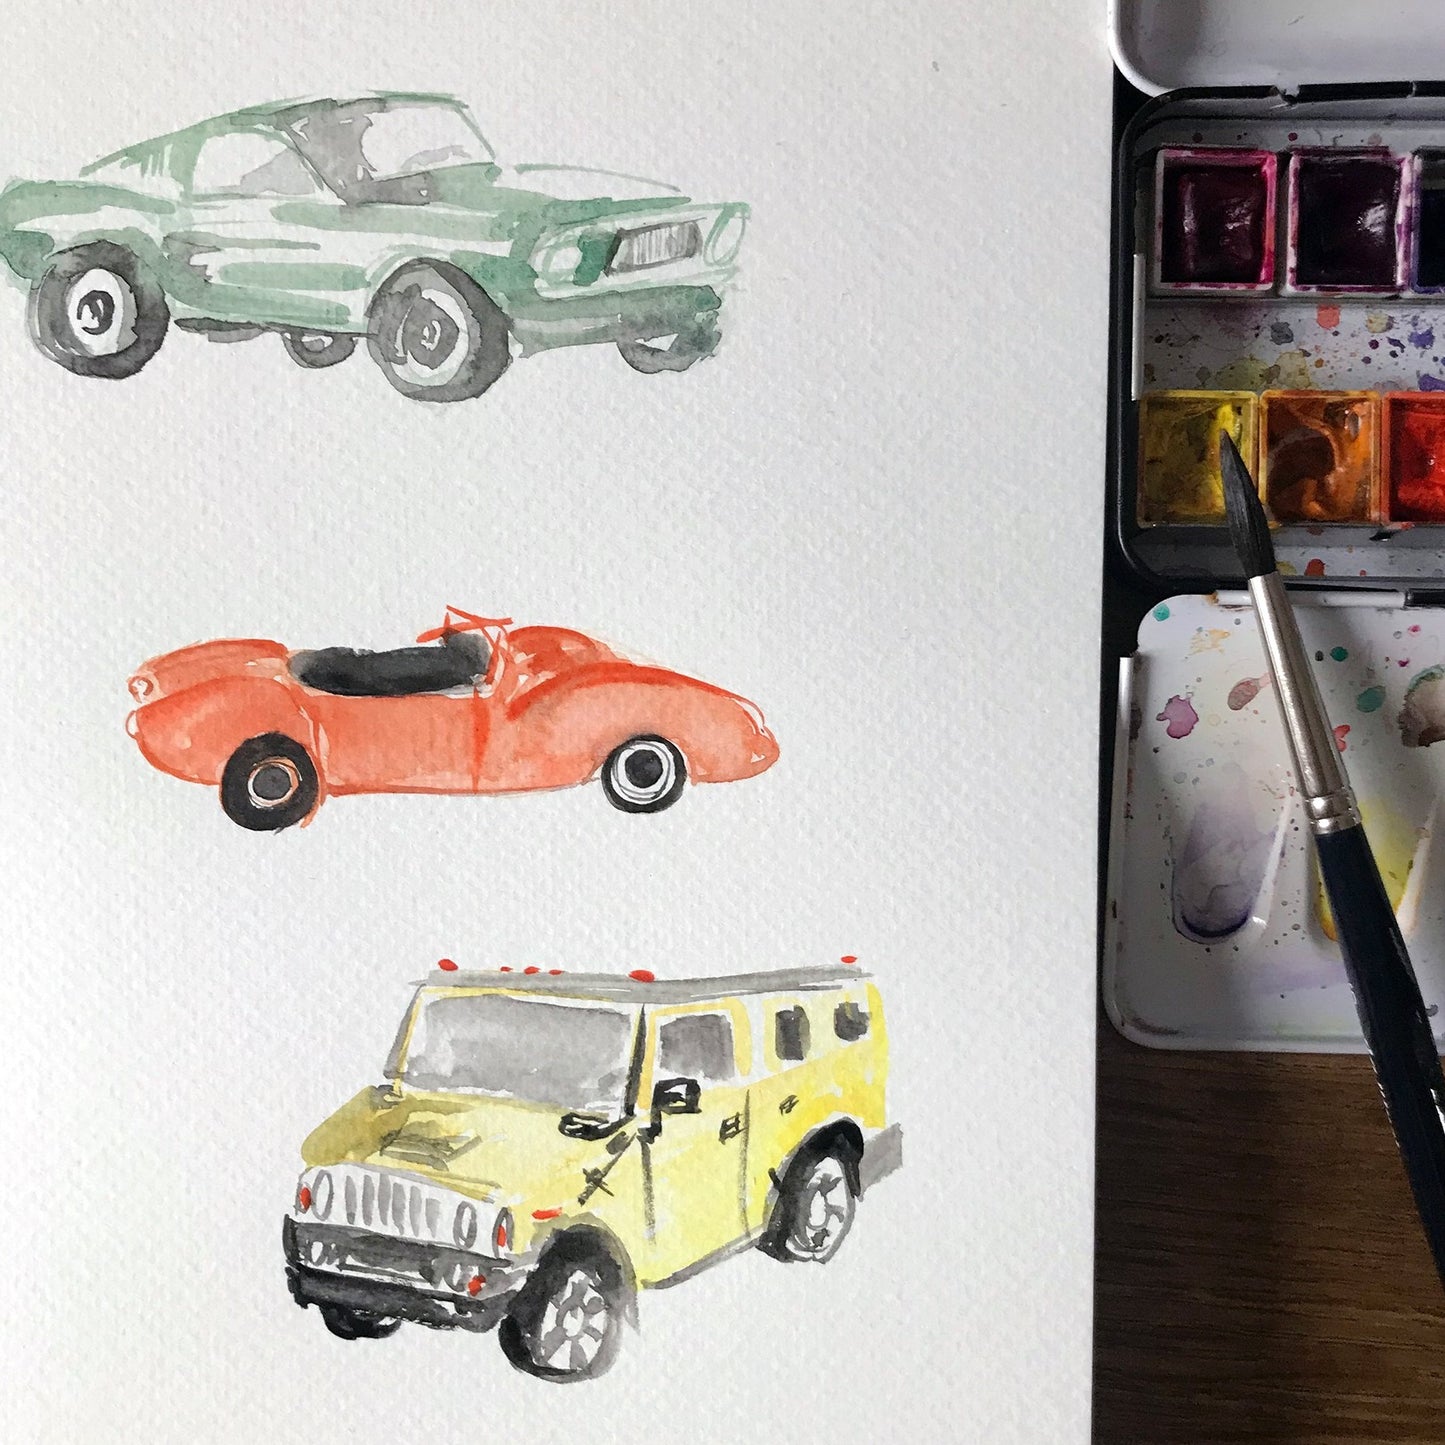 Illustrated primer of cars